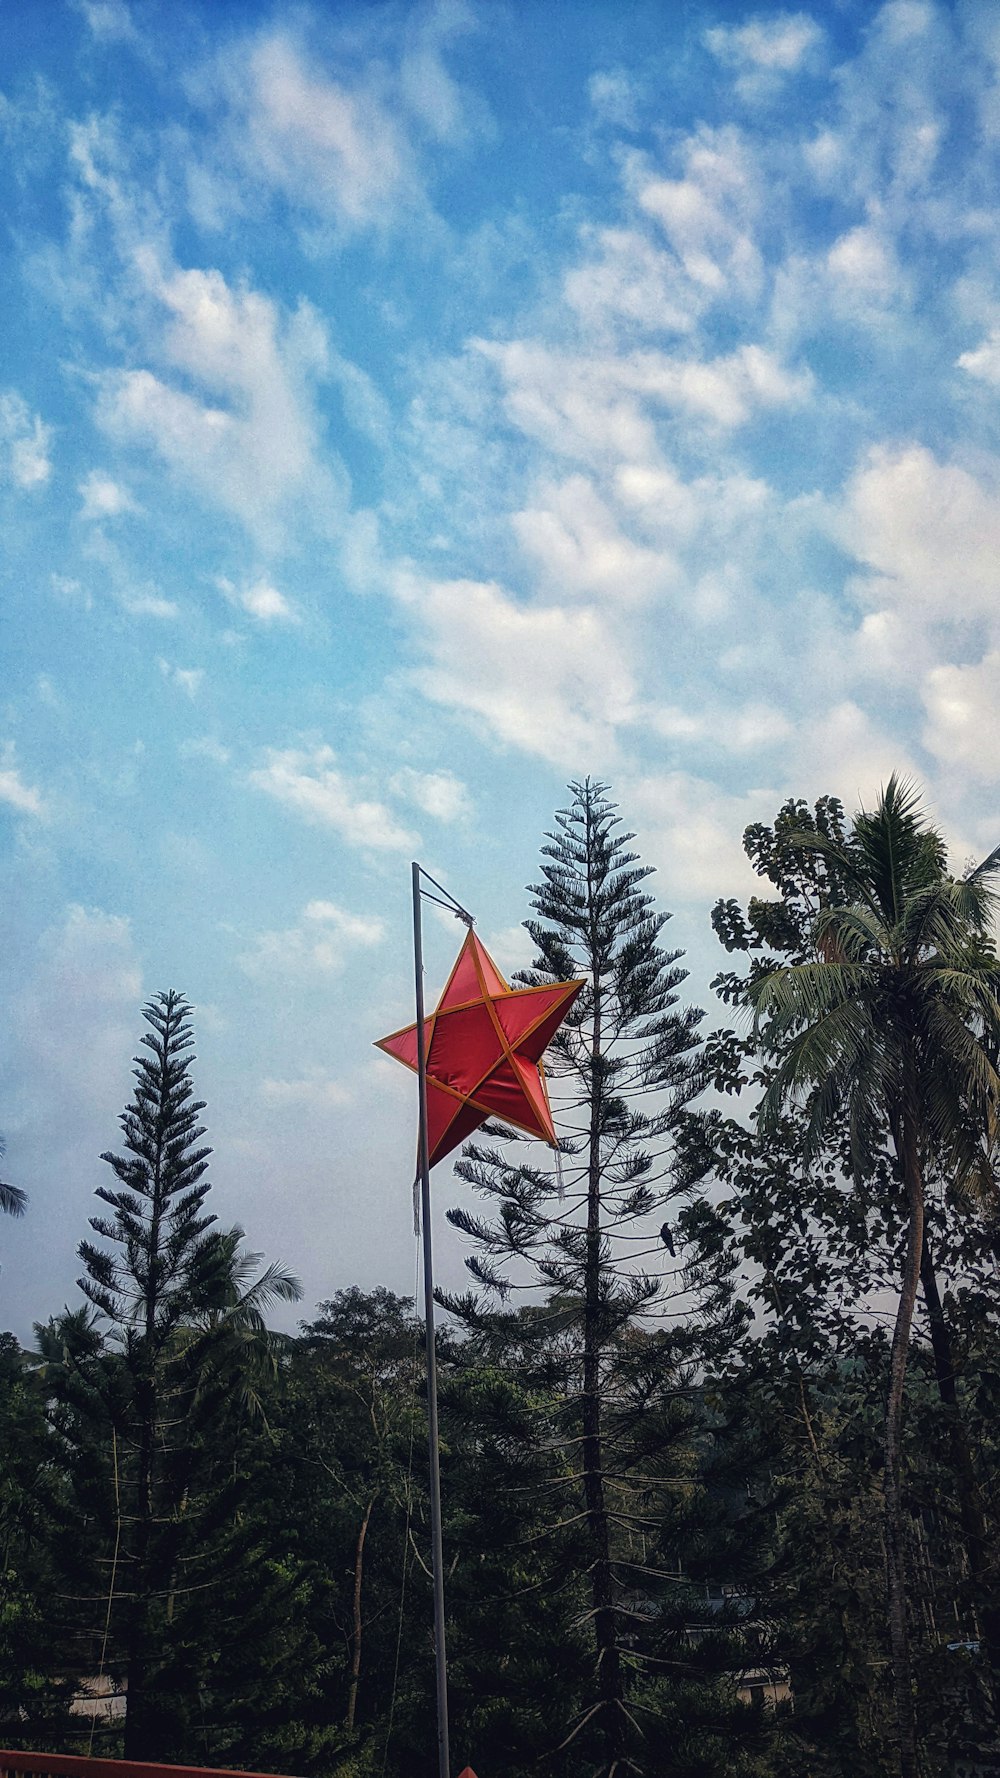 a large red star on a pole in front of some trees